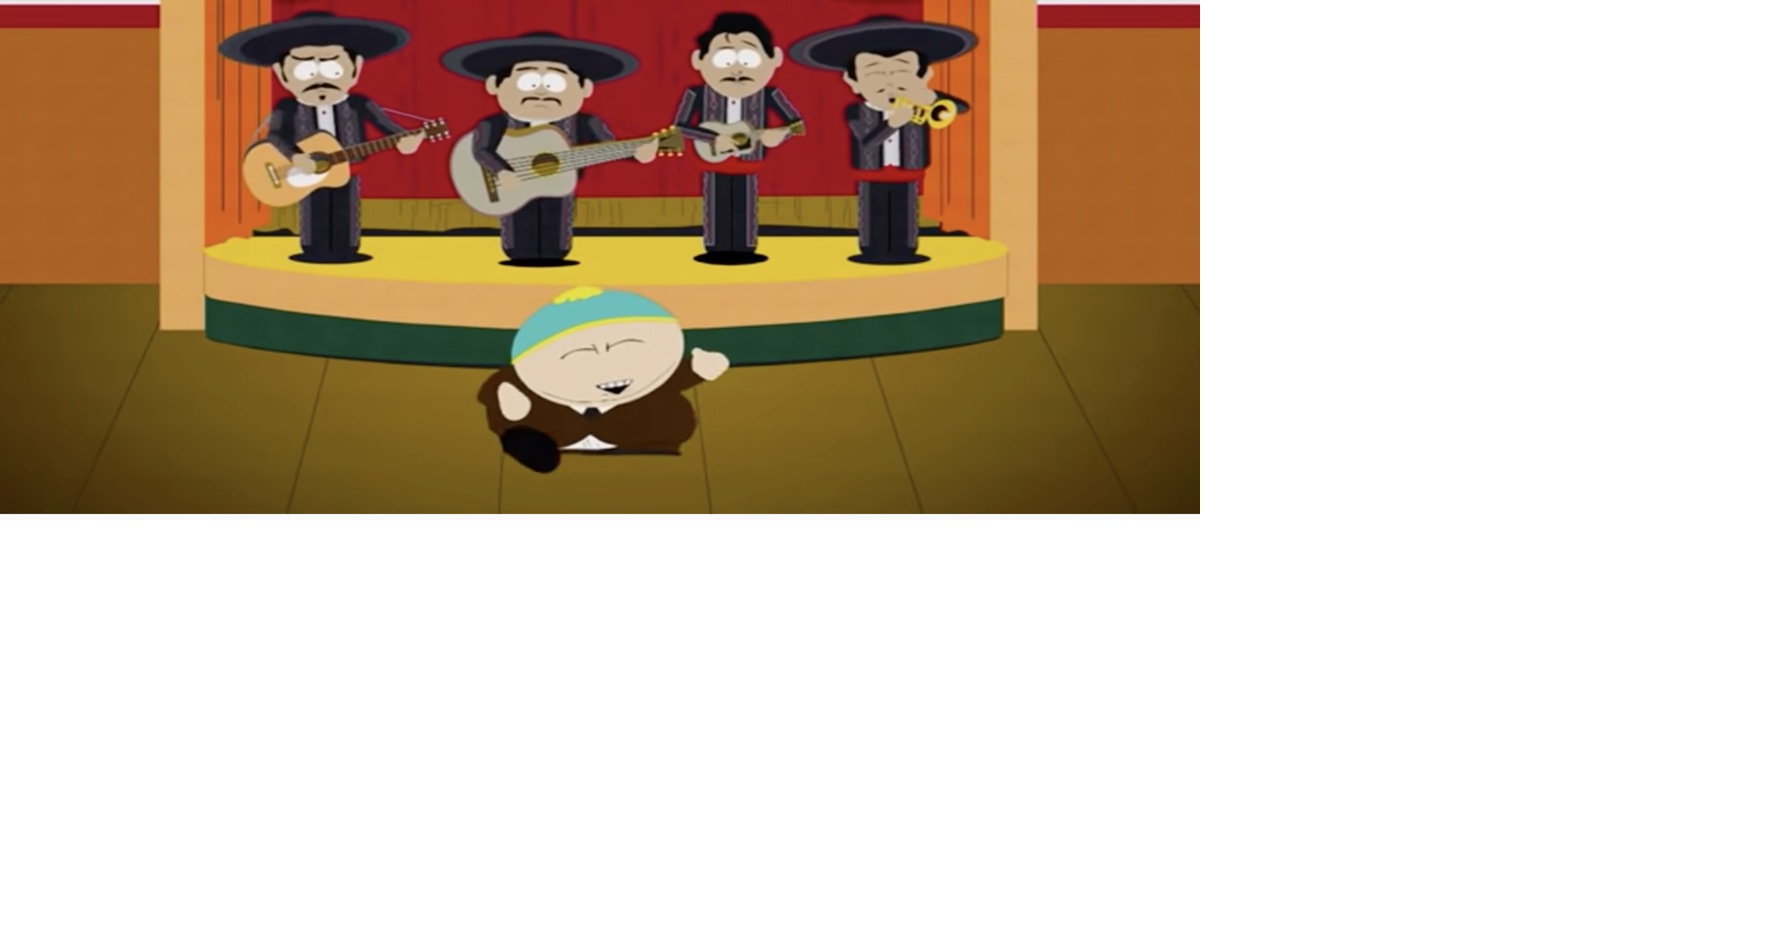 What to Know About the 'South Park' Creators' Casa Bonita